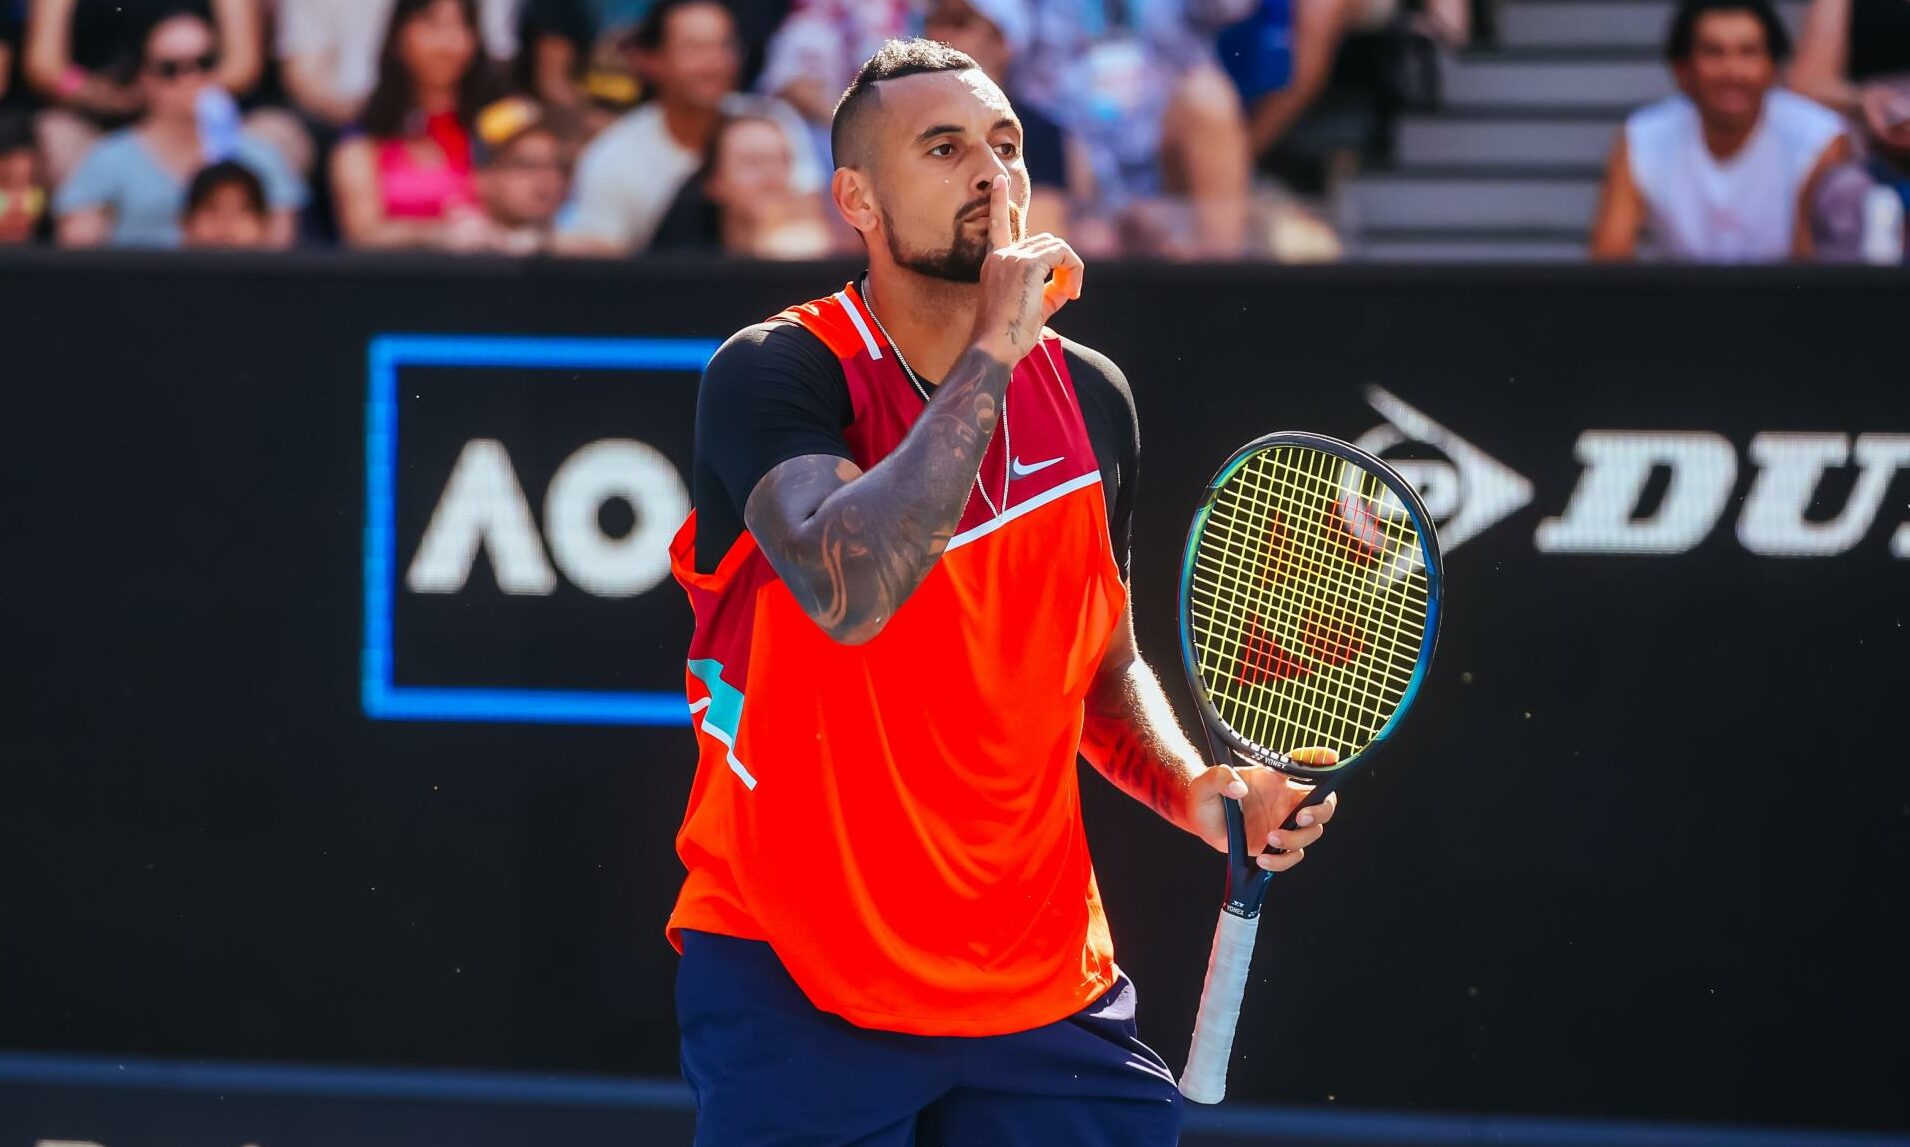 In recent months Nick Kyrgios has made headlines for failing to keep his emotions in check on the court.